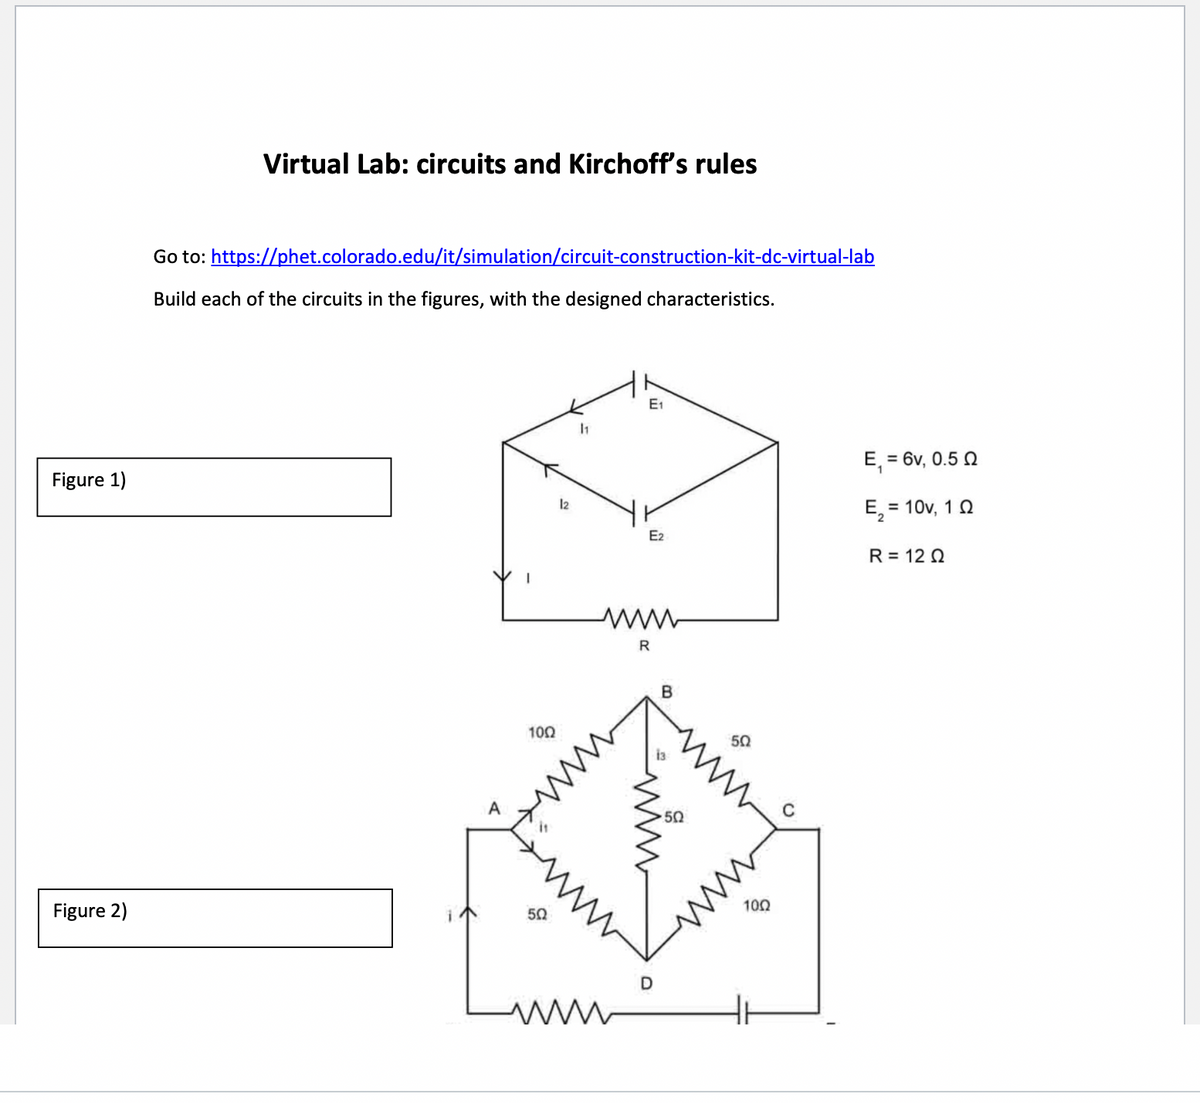 Figure 1)
Figure 2)
Virtual Lab: circuits and Kirchoff's rules
Go to:
https://phet.colorado.edu/it/simulation/circuit-construction-kit-dc-virtual-lab
Build each of the circuits in the figures, with the designed characteristics.
A
1002
502
12
11
www.
E₁
E2
R
B
D
502
ww
50
ww
1002
E₁ = 6v, 0.502
E₂ = 10v, 10
R = 120